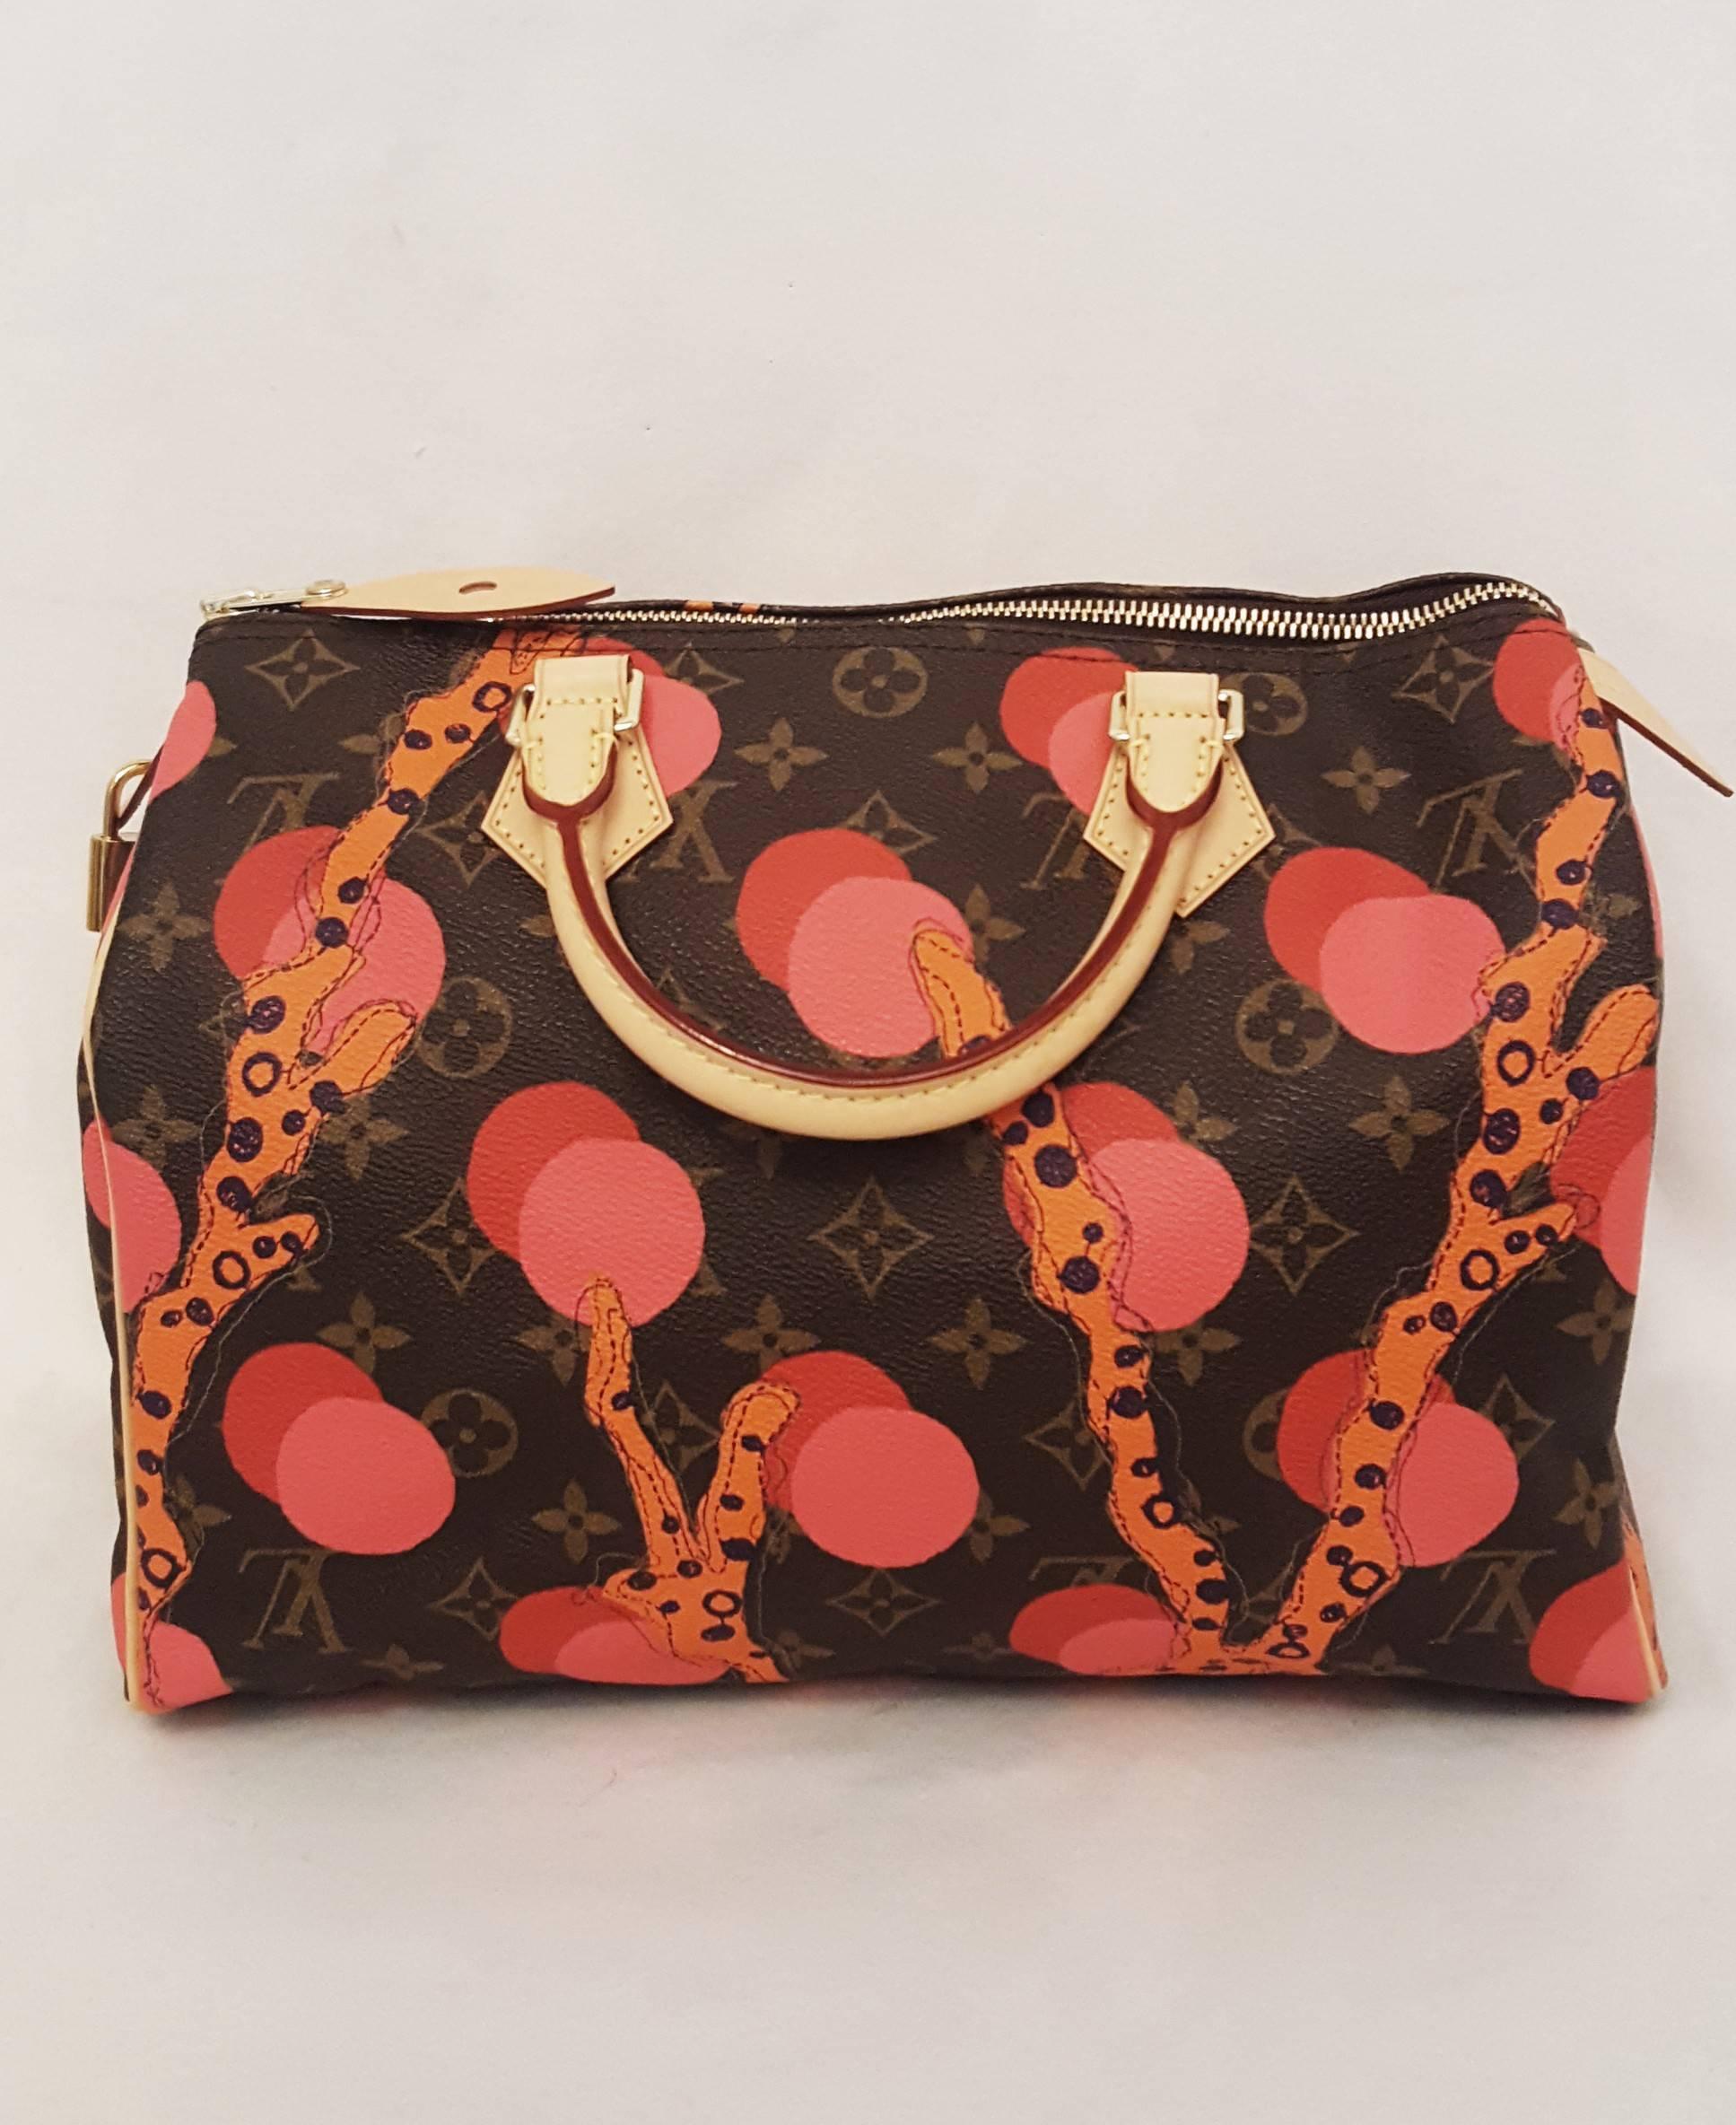 Louis Vuitton Speedy Ramages bag from the 2015 cruise collection features the iconic monogram canvas with the ramages print implemented into this classic Speedy.  Adding the bright coral, red and pink colors to the monogram background launches you